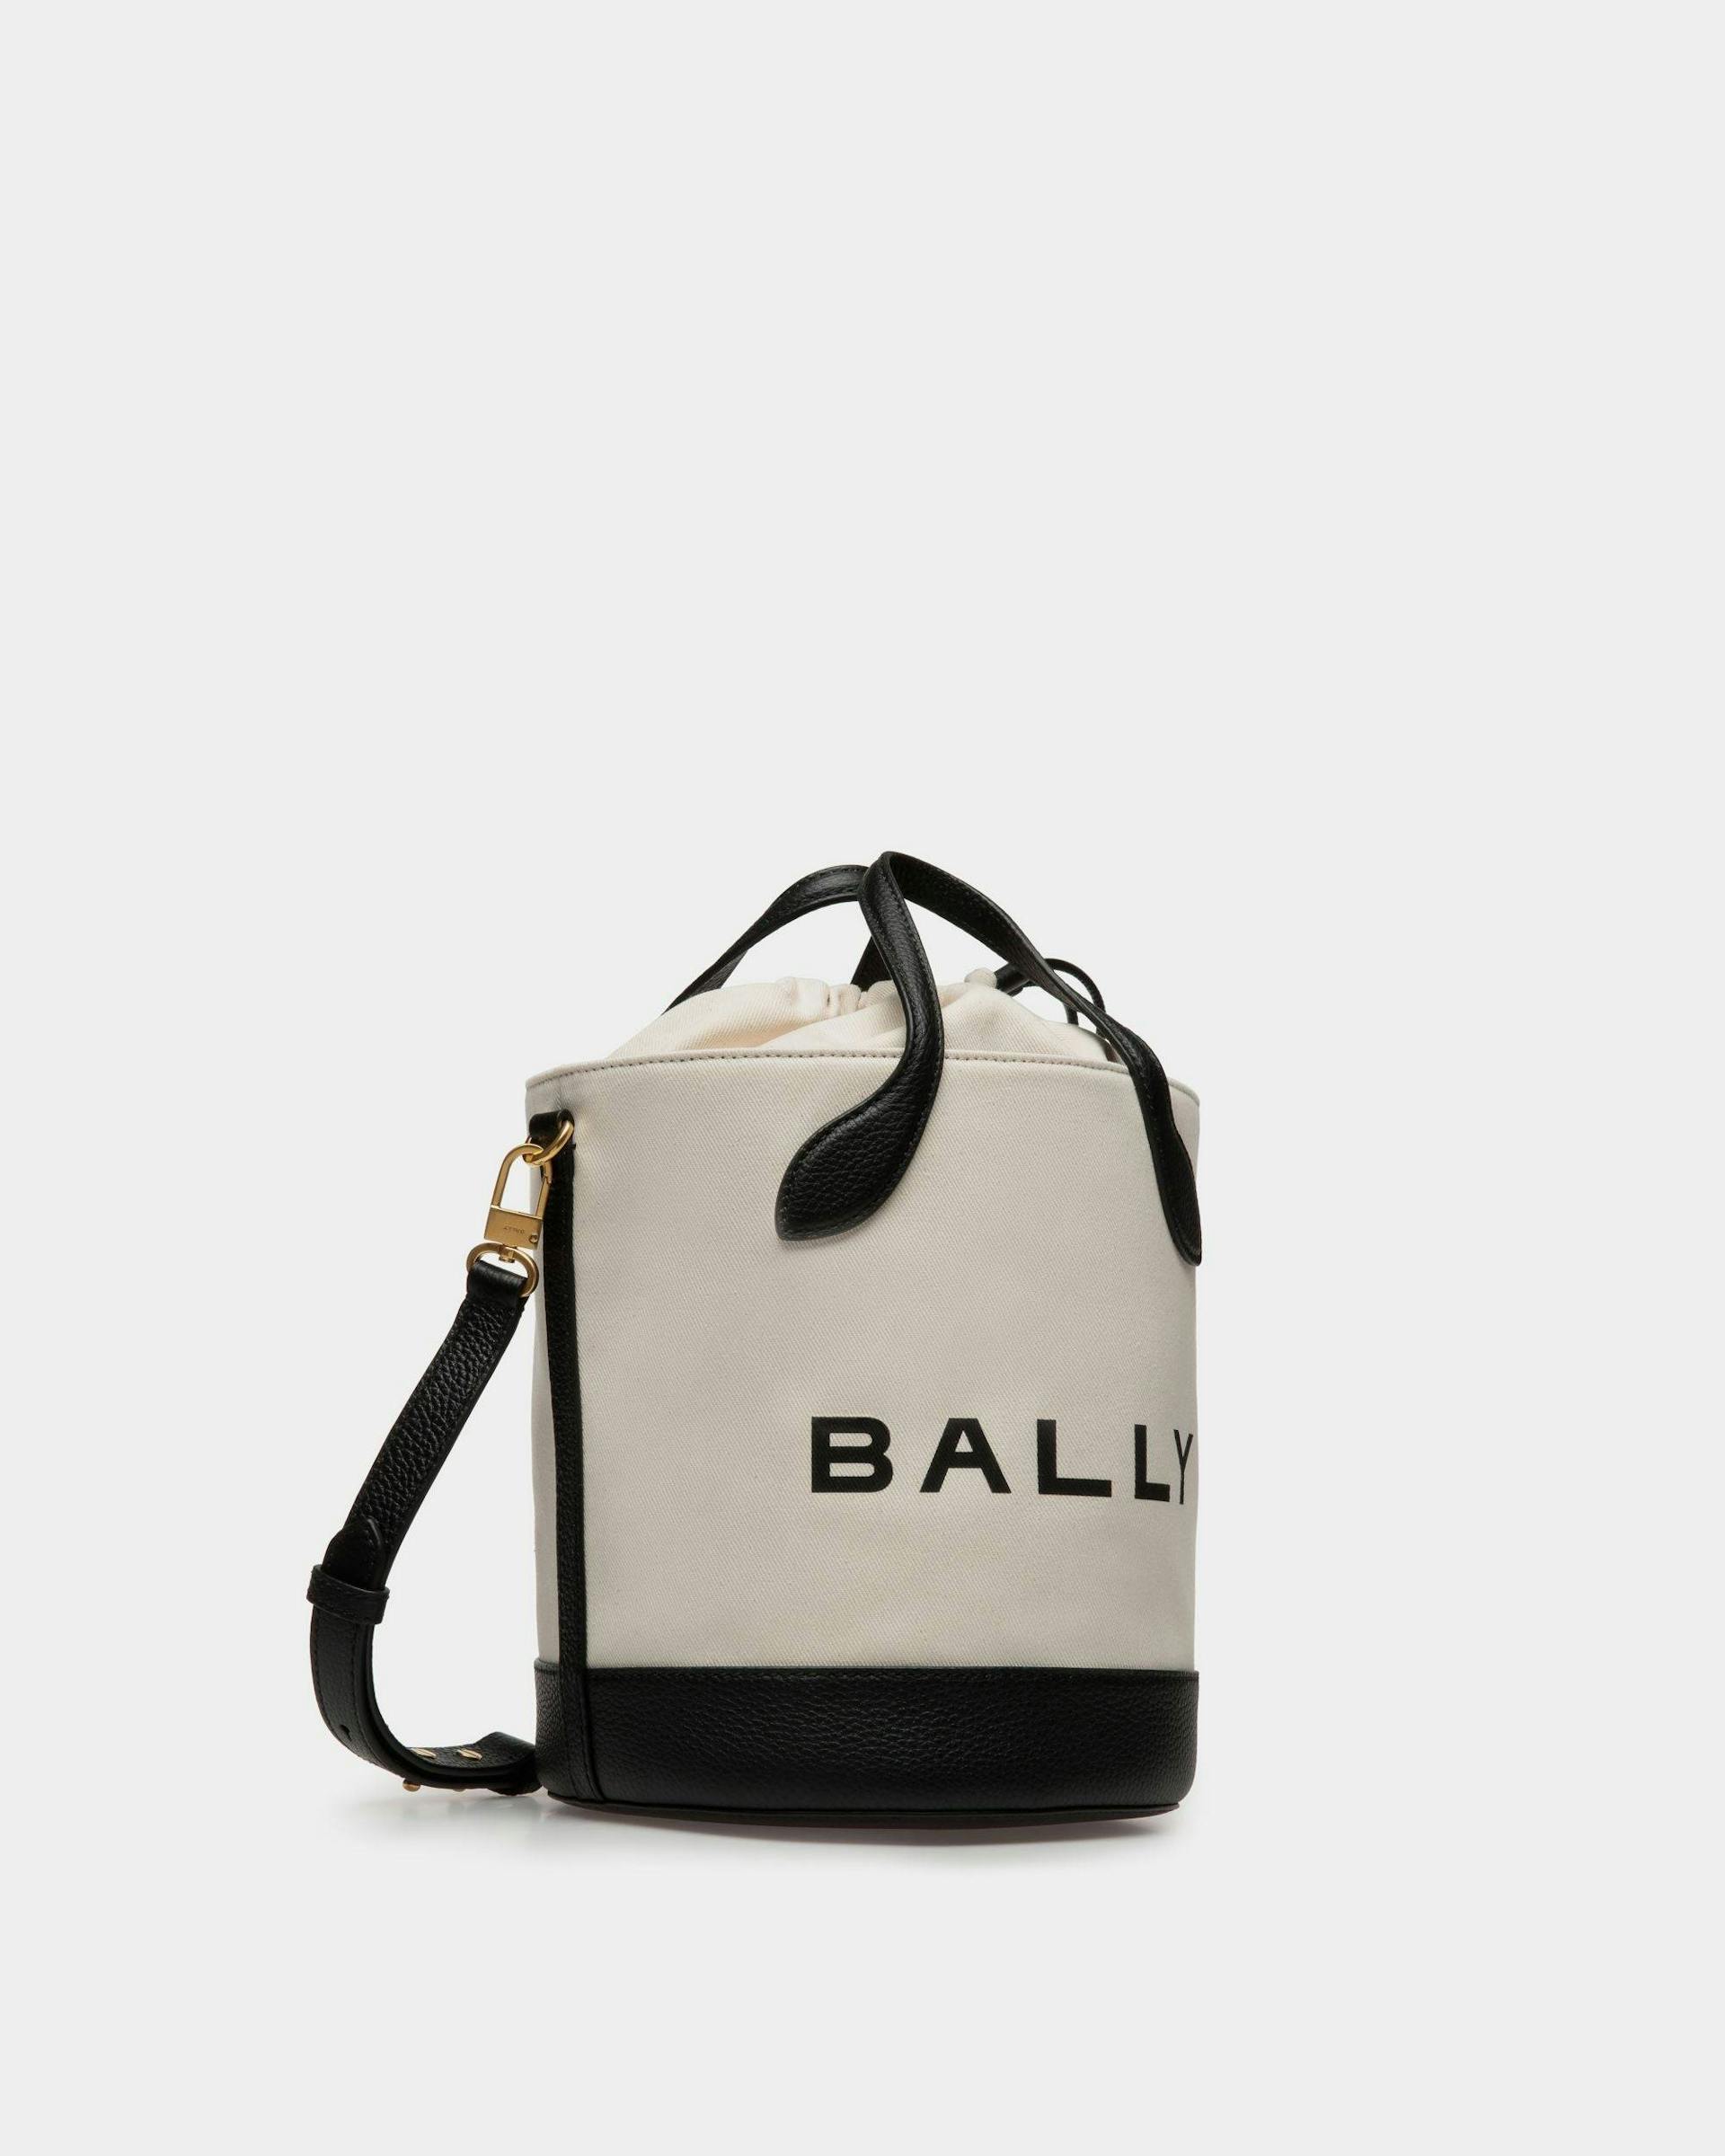 Bar Bucket Bag In Natural And Black Fabric - Women's - Bally - 04